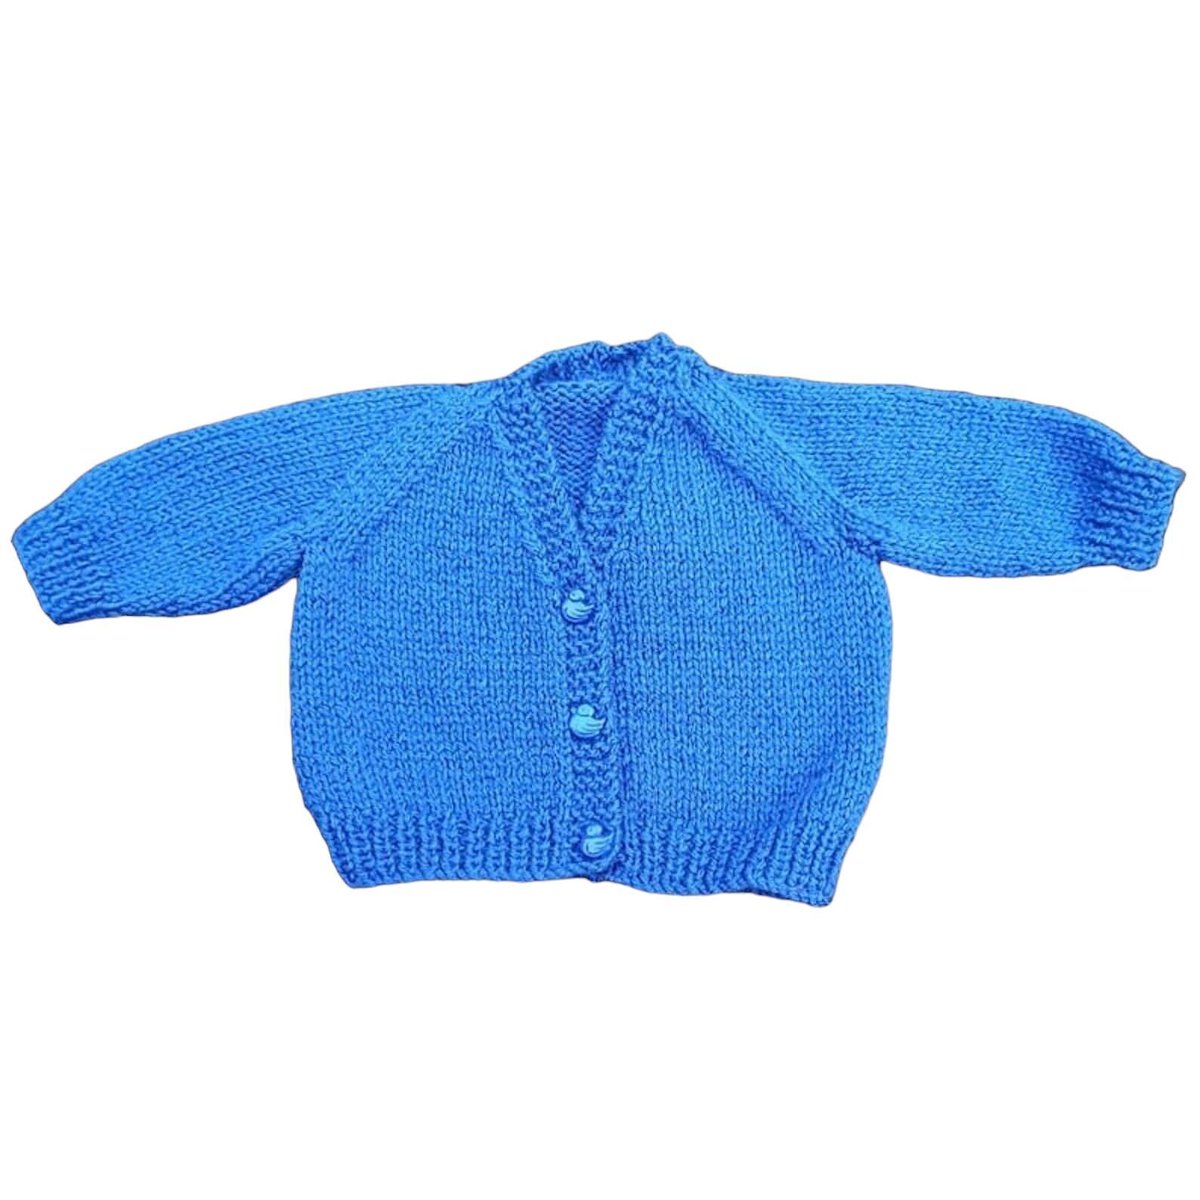 Check out this adorable hand-knitted v neck cardigan in a beautiful mid blue shade! Perfect for boys, girls, or even reborn dolls. Get yours now on #Etsy: knittingtopia.etsy.com/listing/168501… #knittingtopia #knittedbabyclothes #etsyRT #tweeturbiz #WomenInBiz #craftbizparty #tweetuk #MHHSBD